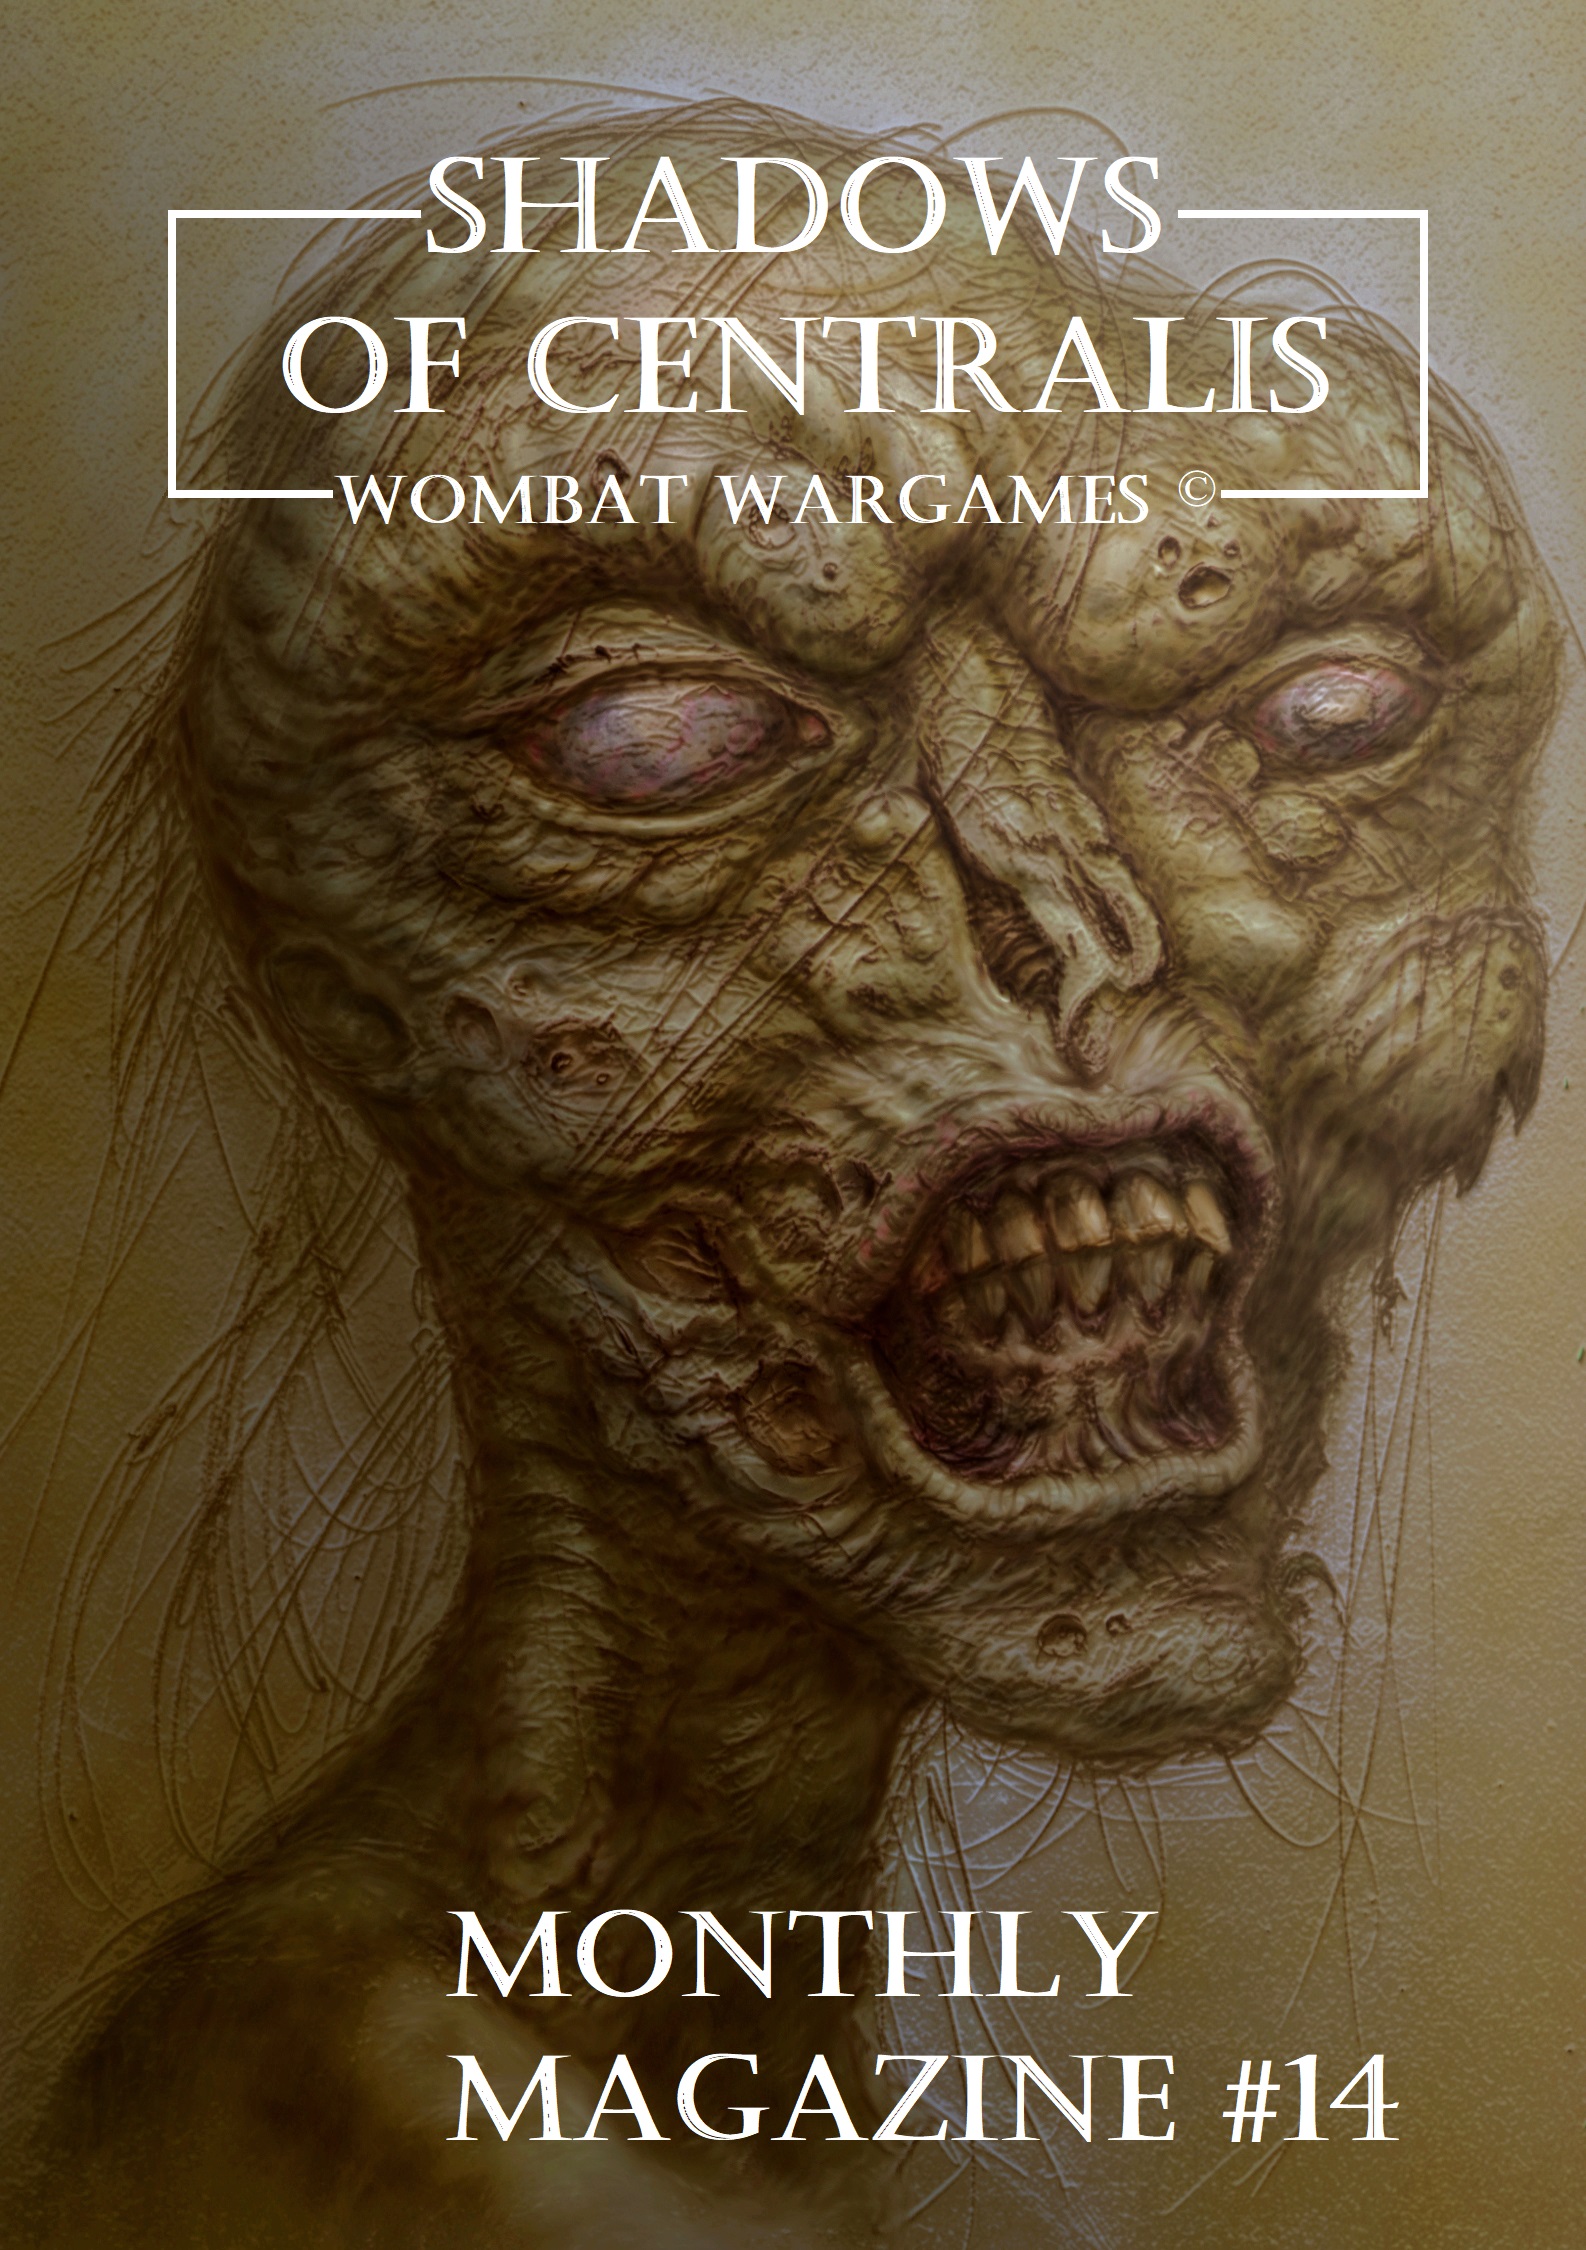 Shadows of Centralis Monthly Magazine #14 by Wombat Wargames